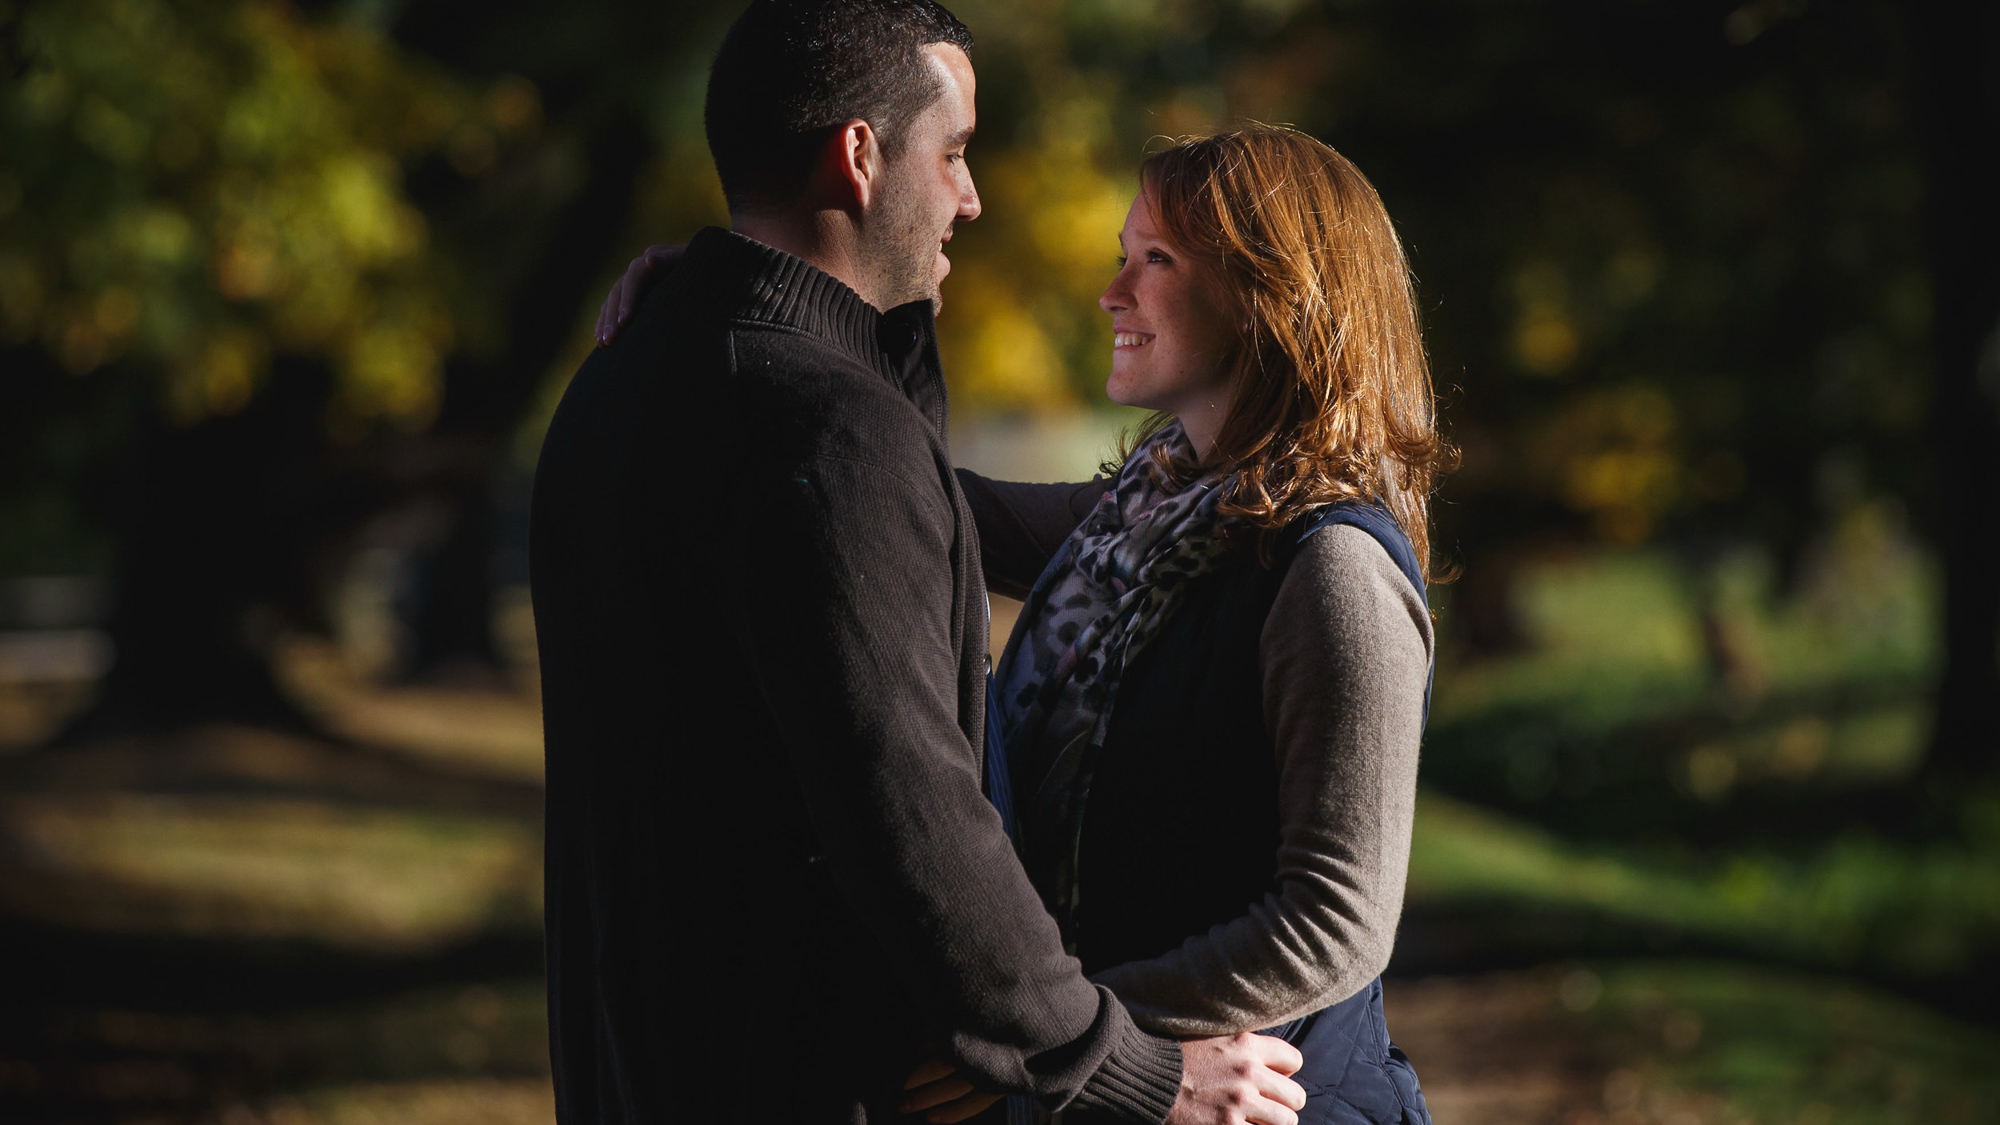 Engagement photographers in CT